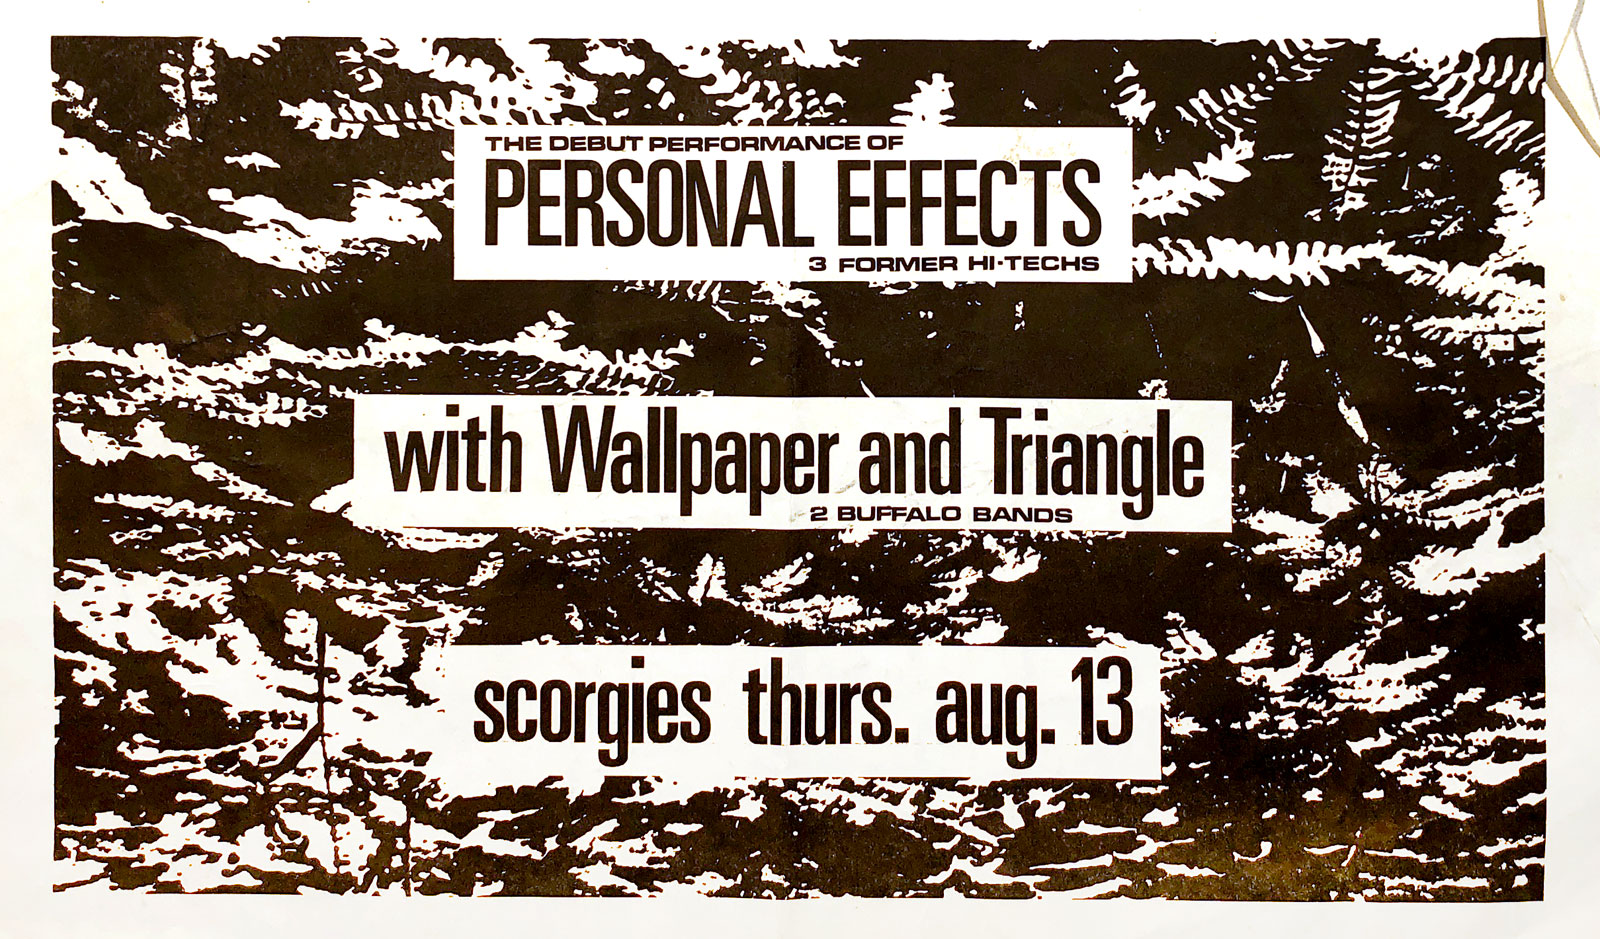 Poster for Personal Effects with Wallpaper and Triangle at Scorgie's in Rochester, New York on 08.13.1981